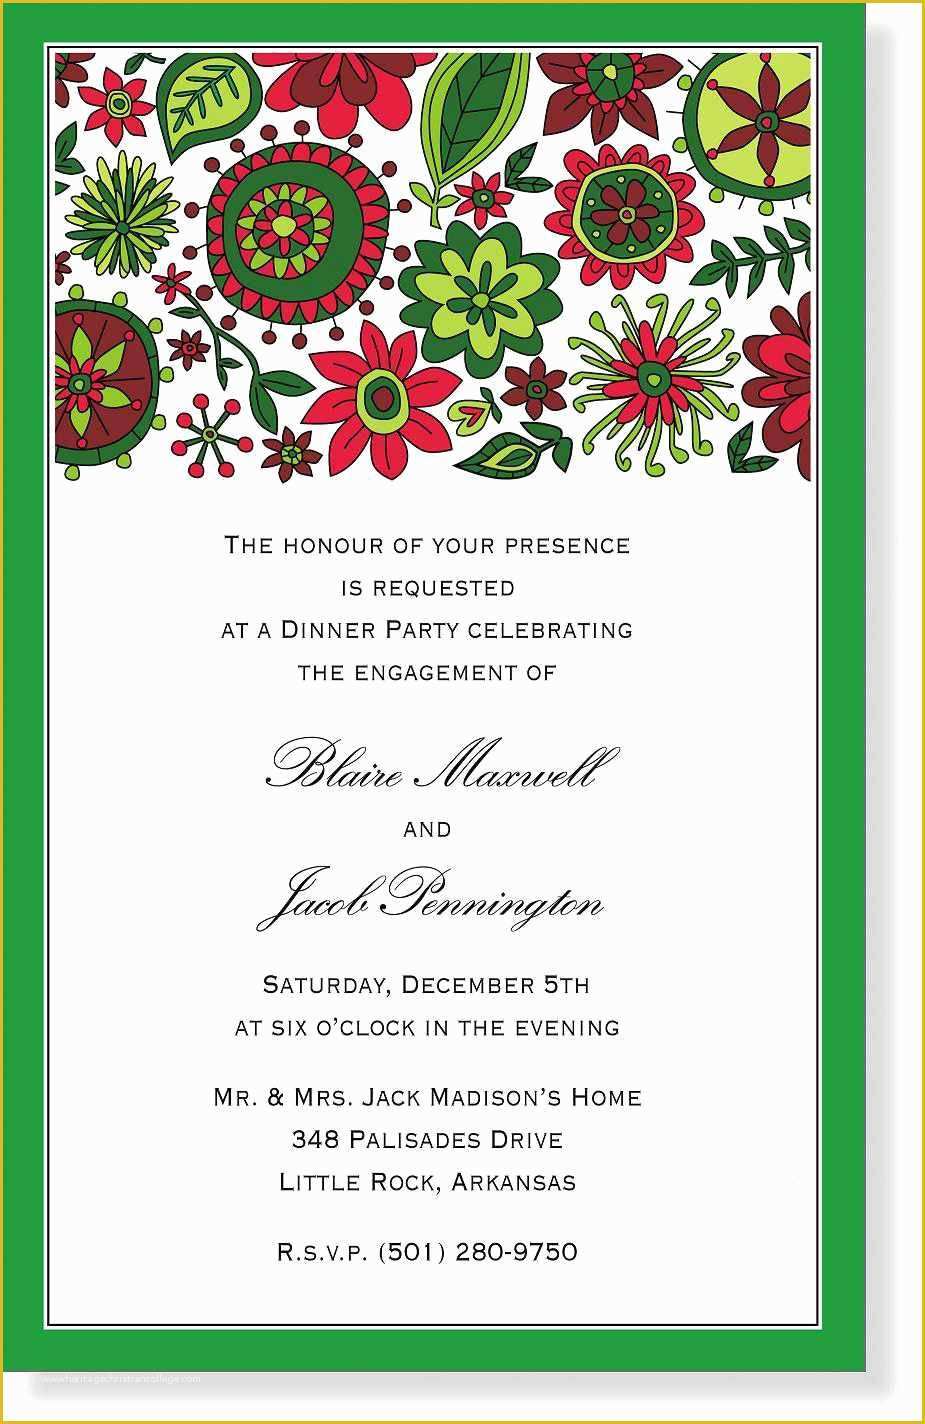 Christmas Party Invitation Templates Free Word Of Christmas Party Invitation Template